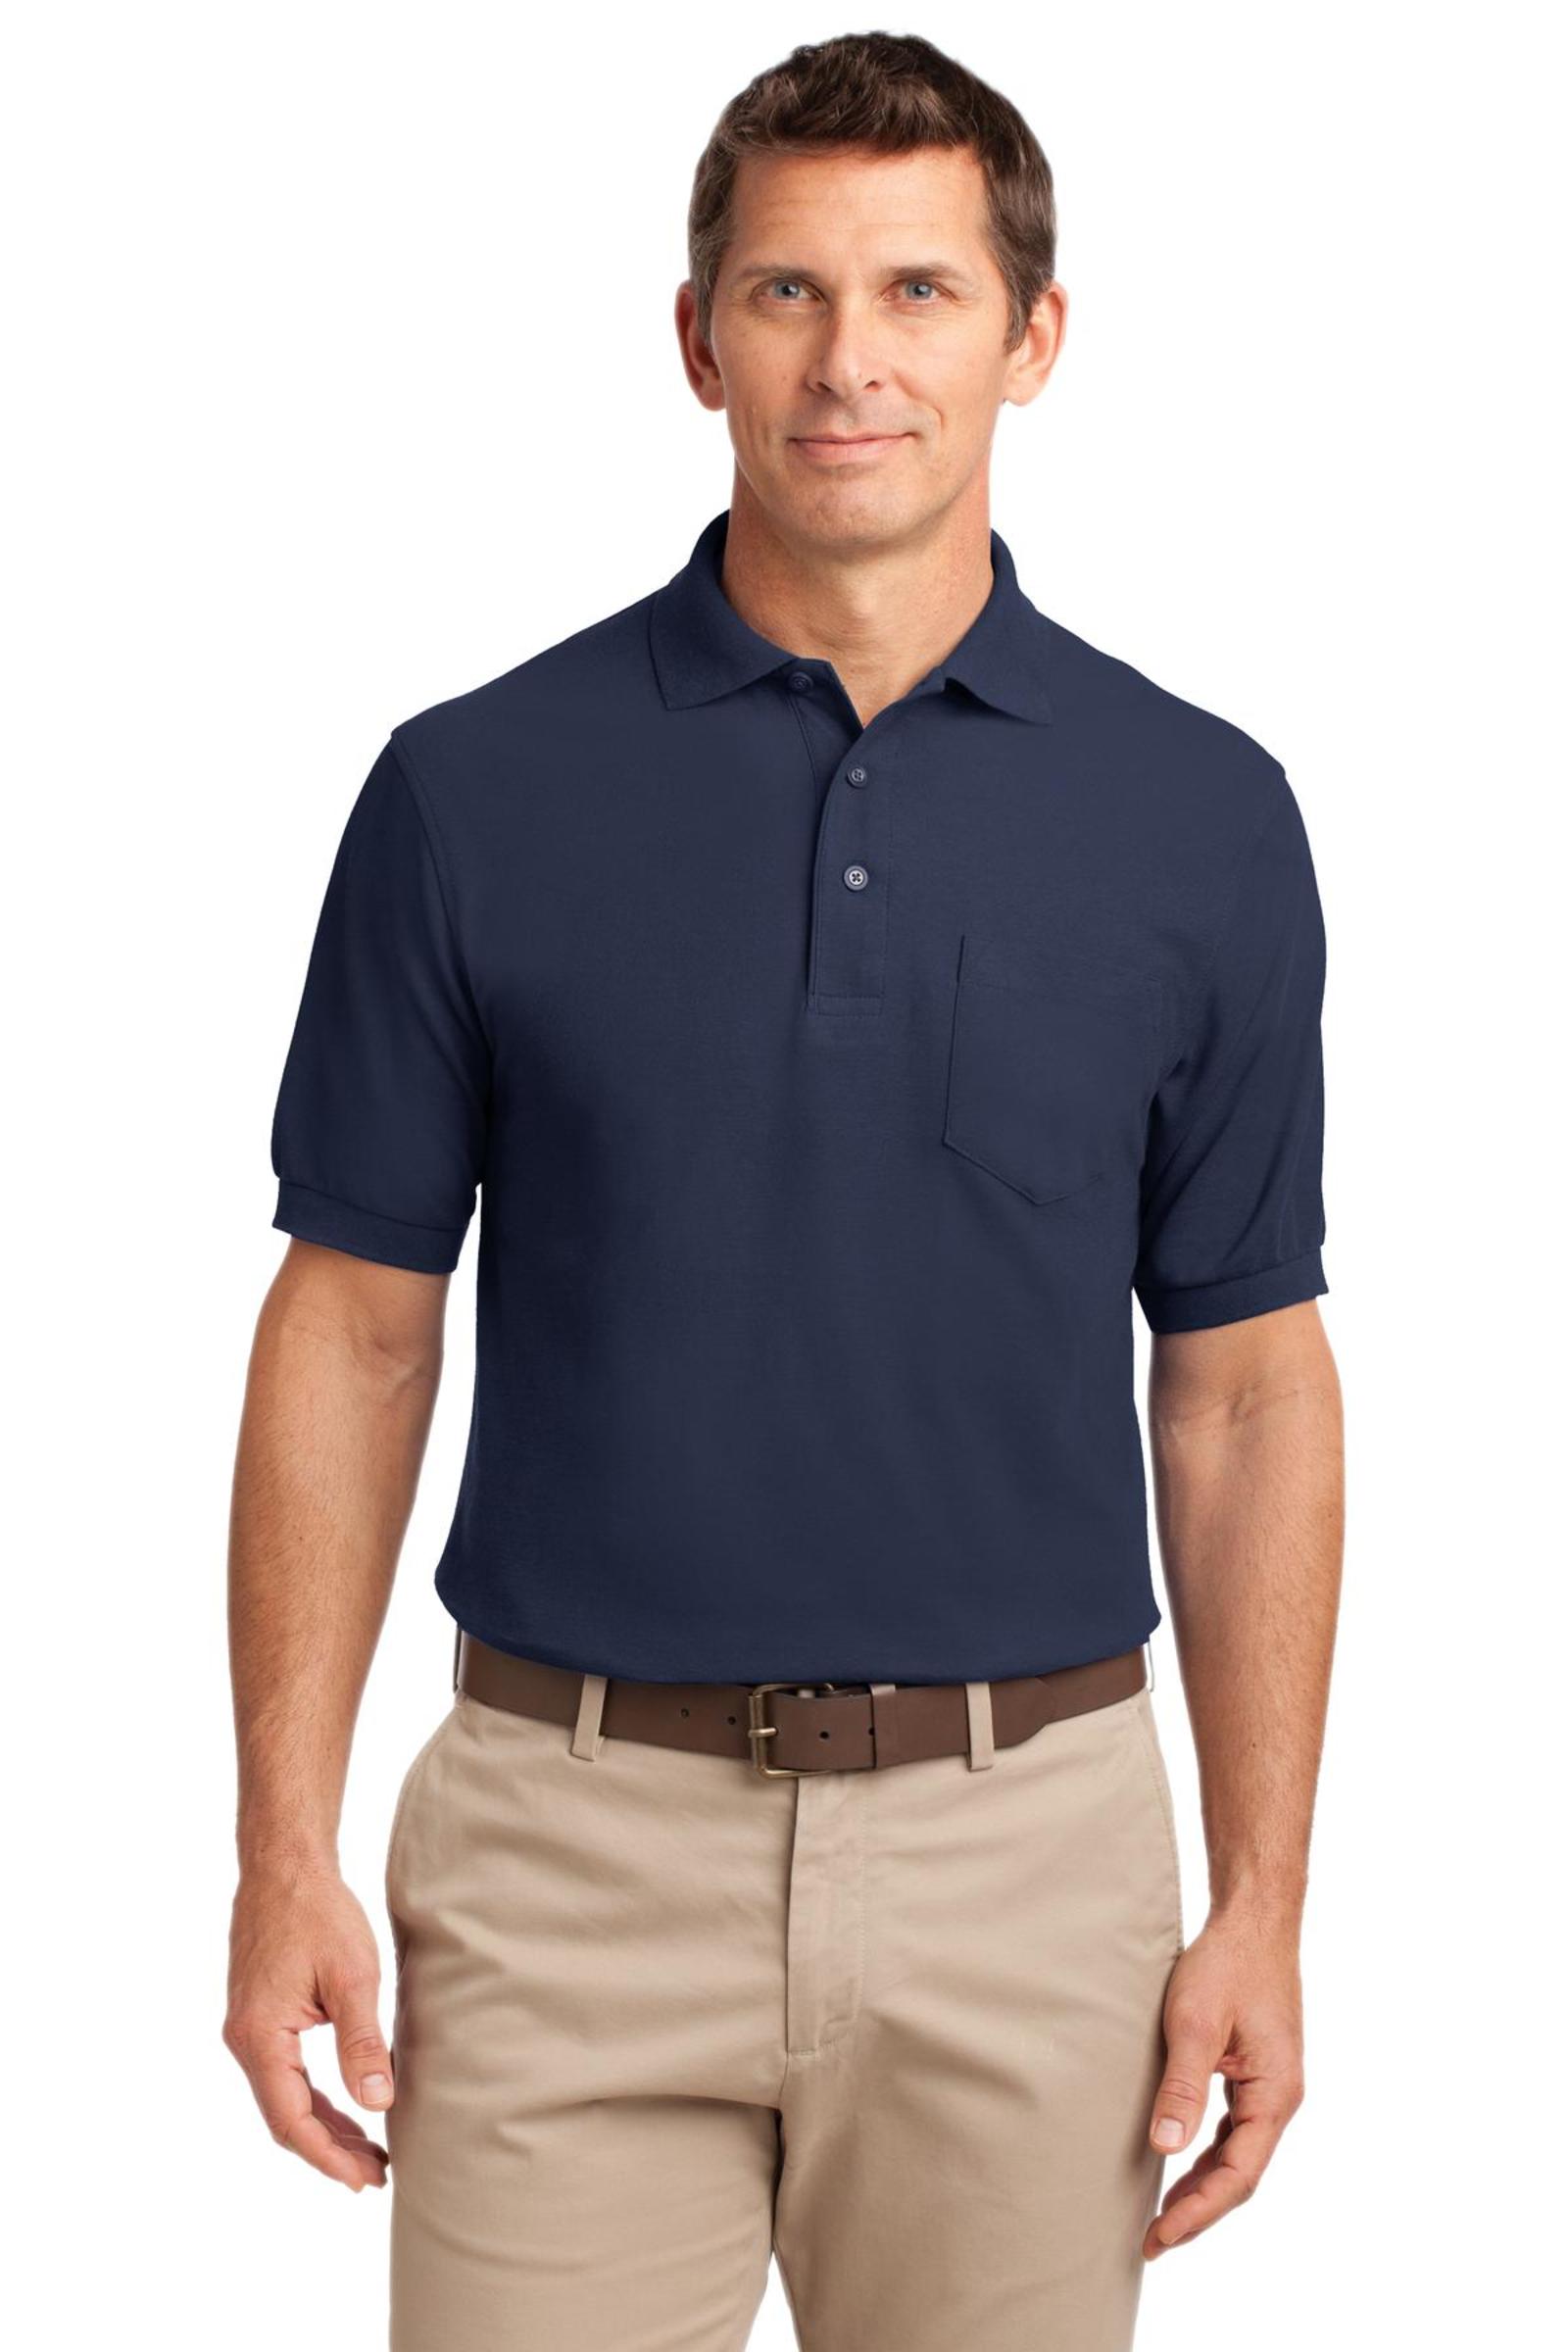 Port Authority Embroidered Men's Tall Silk Touch Pique Pocket Polo